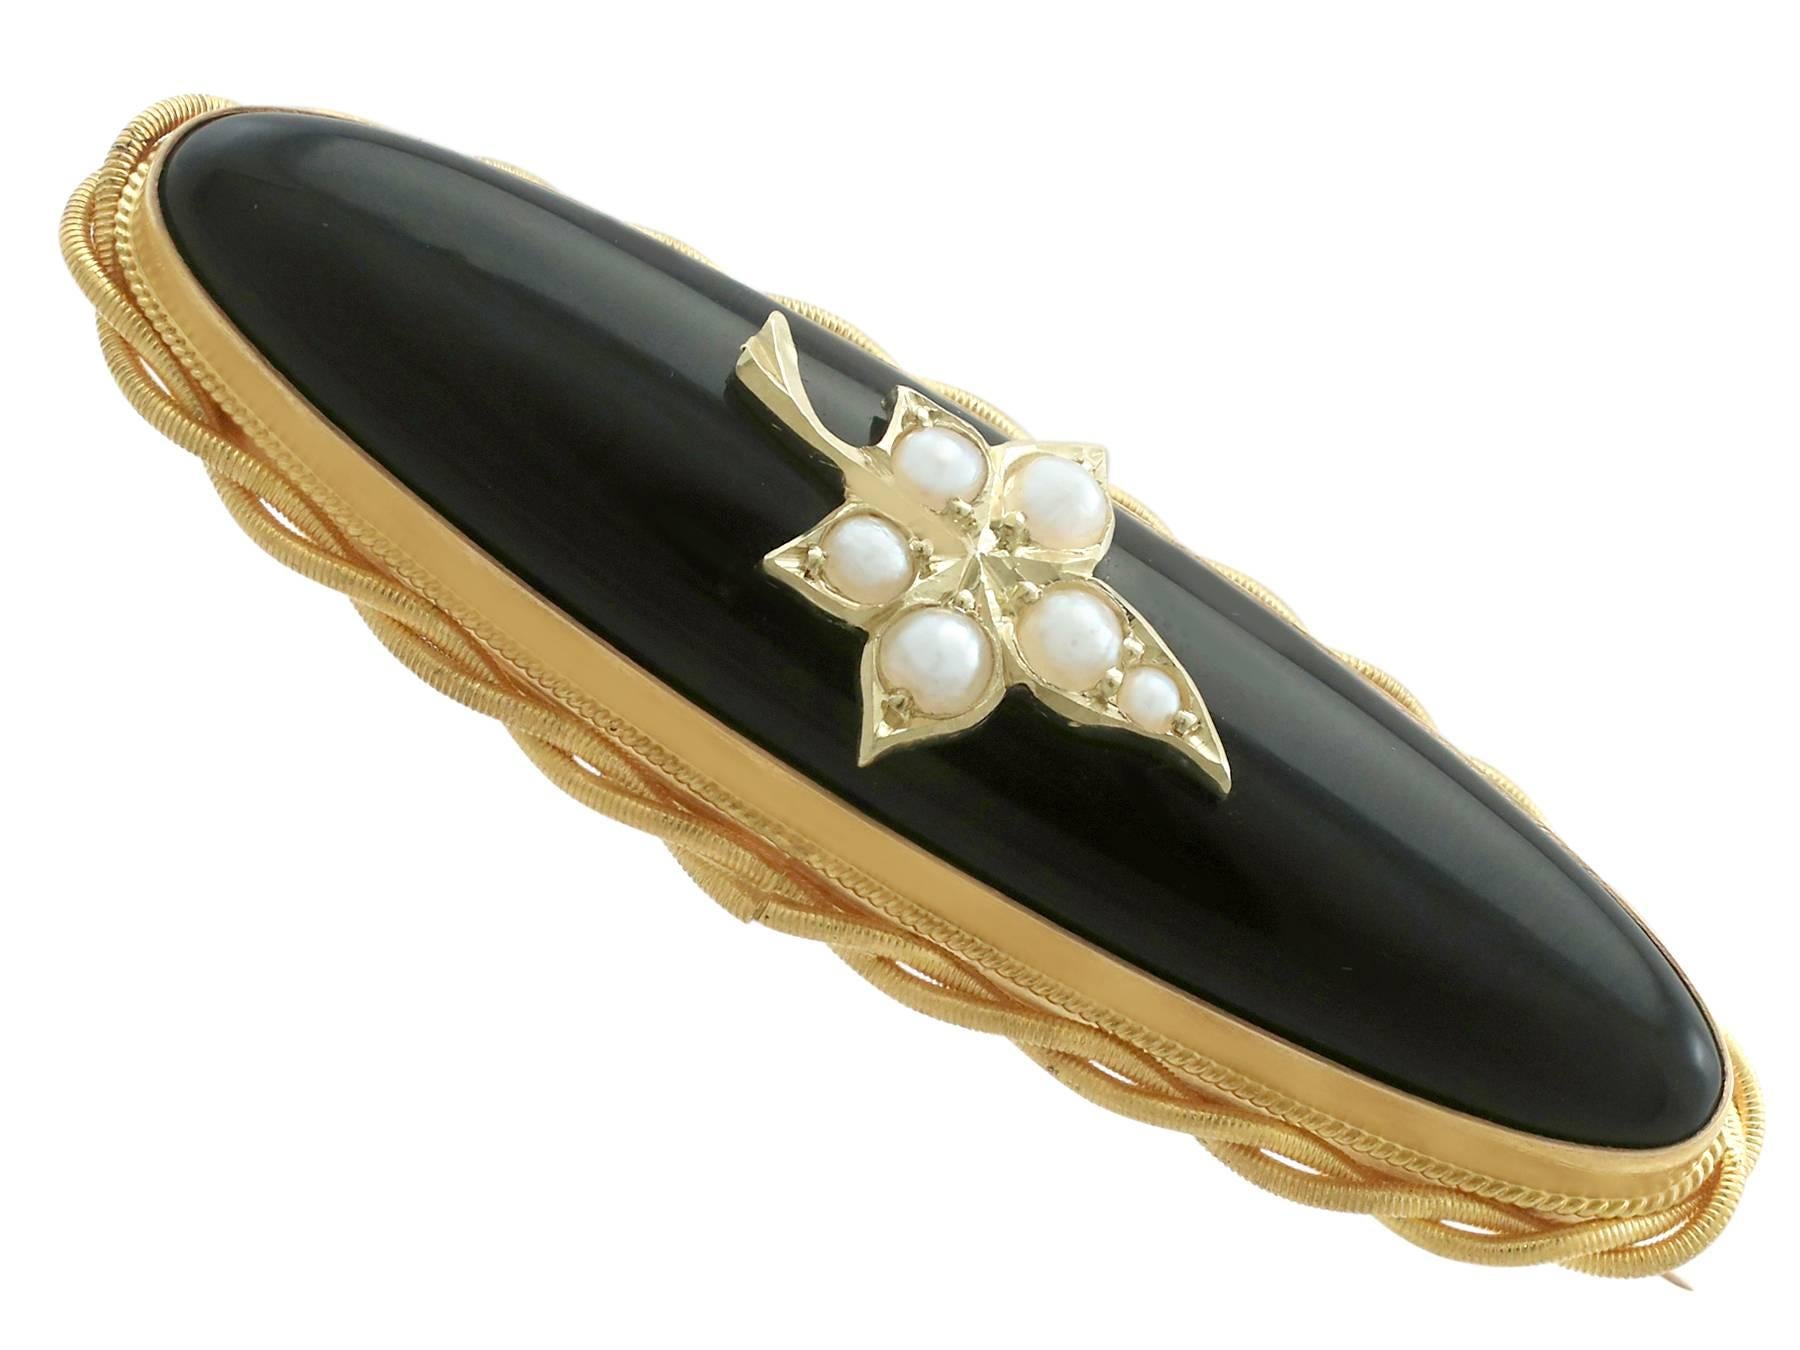 An impressive antique Victorian black onyx and seed pearl, 21 karat yellow gold mourning brooch with 14 karat yellow gold pin.

This fine and impressive Victorian mourning brooch has been crafted in 21k yellow gold with a 14k yellow gold pin.

The